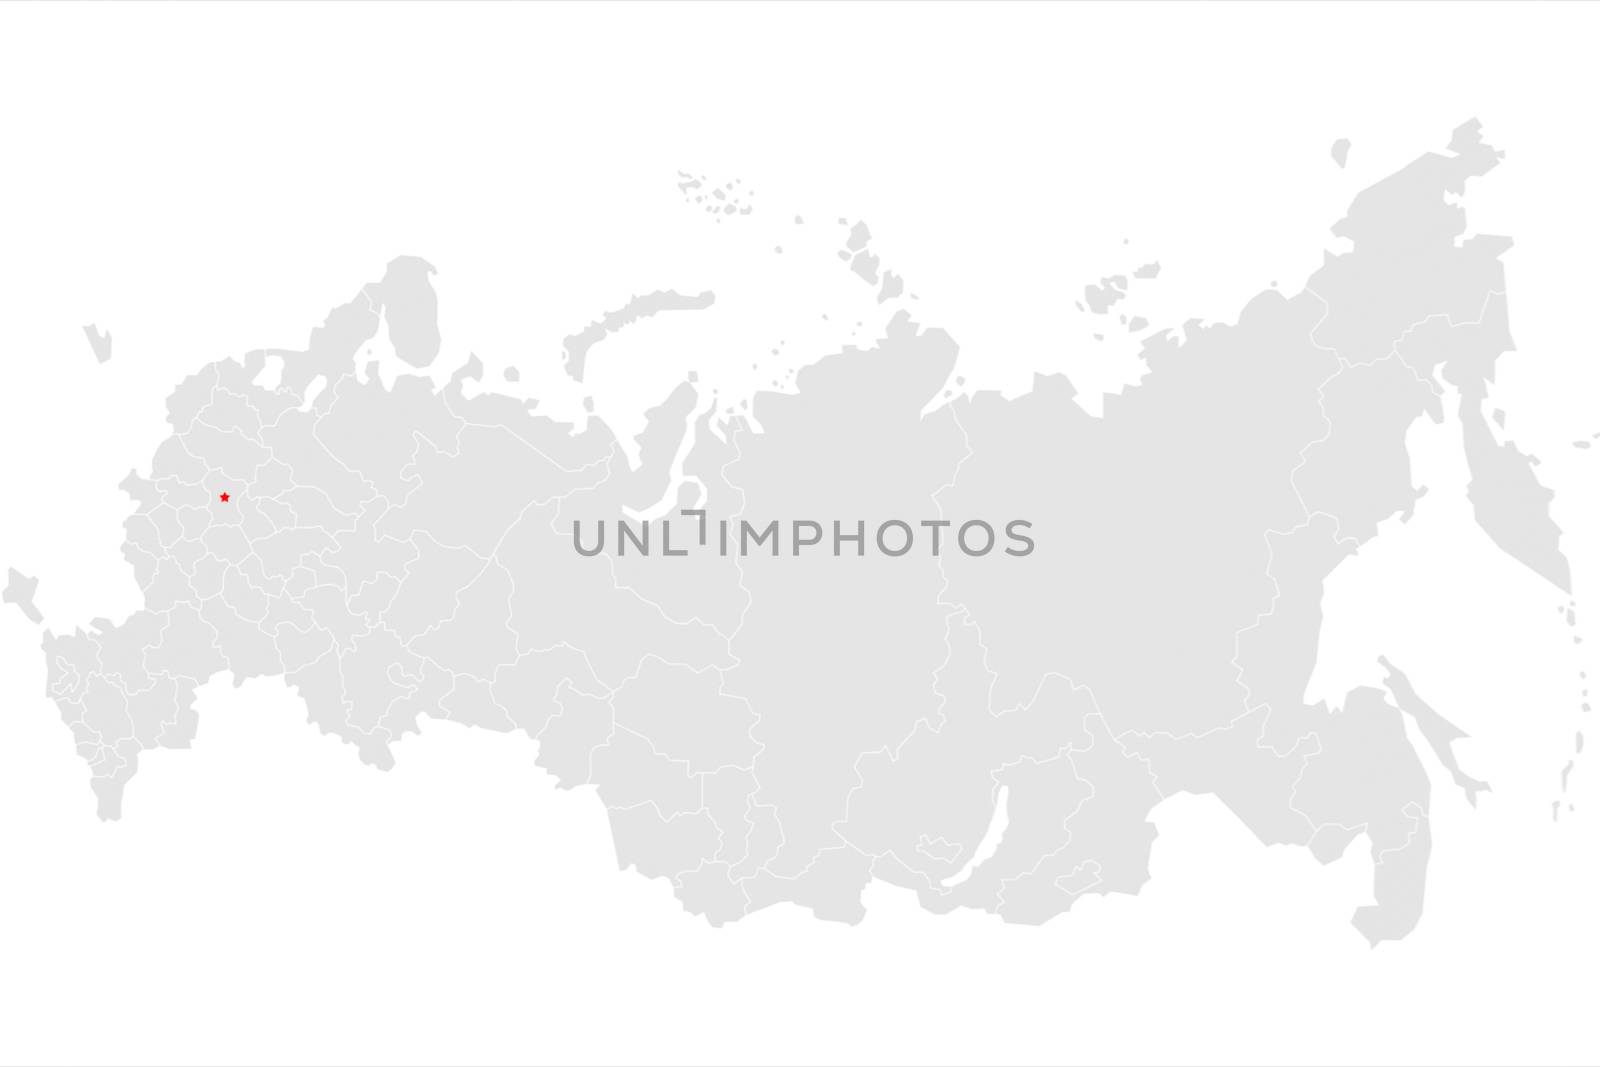 Russia map illustration. Map of Russia in gray on a white background.